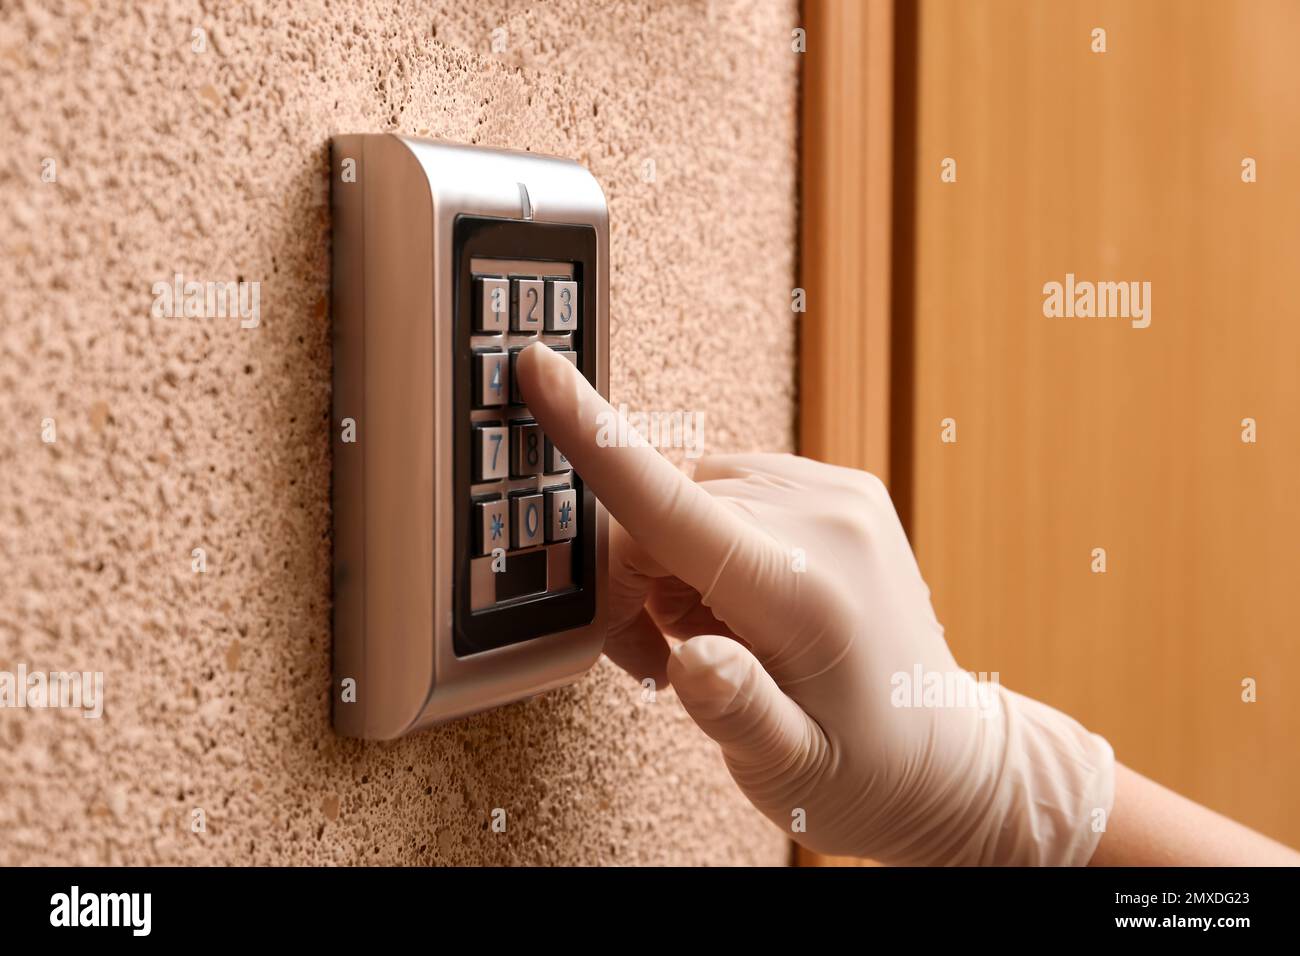 Woman in gloves entering code on electronic lock's keypad indoors, closeup Stock Photo